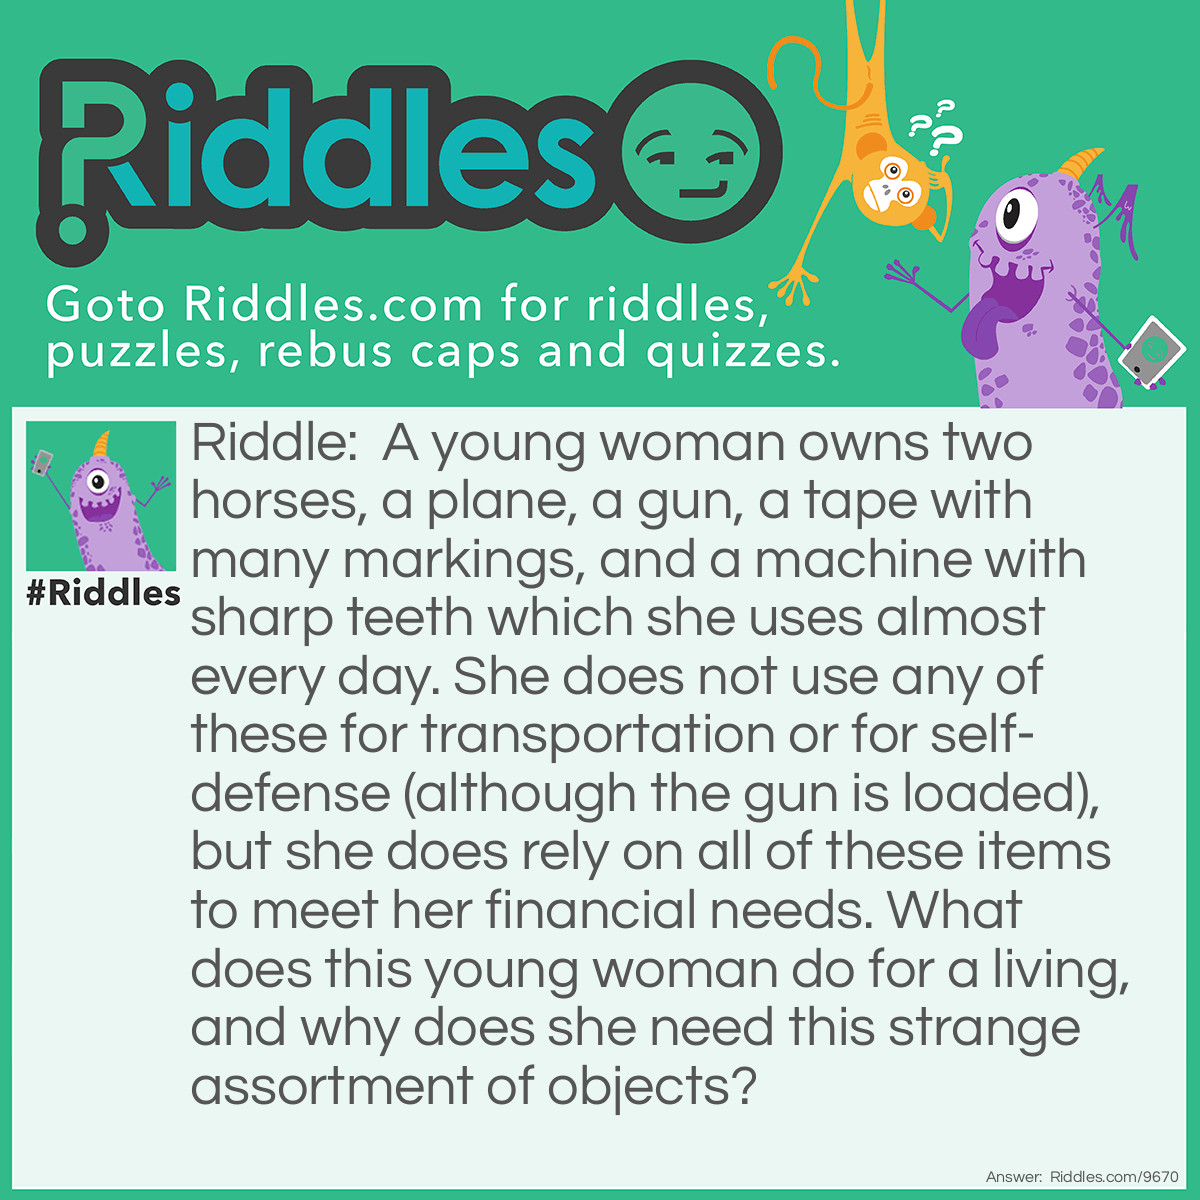 Riddle: A young woman owns two horses, a plane, a gun, a tape with many markings, and a machine with sharp teeth which she uses almost every day. She does not use any of these for transportation or for self-defense (although the gun is loaded), but she does rely on all of these items to meet her financial needs. What does this young woman do for a living, and why does she need this strange assortment of objects? Answer: The young woman is a carpenter. She uses her two sawhorses, her carpenter’s plane, her nail gun, her tape measure, and her circular saw almost every day as she works to earn a living.